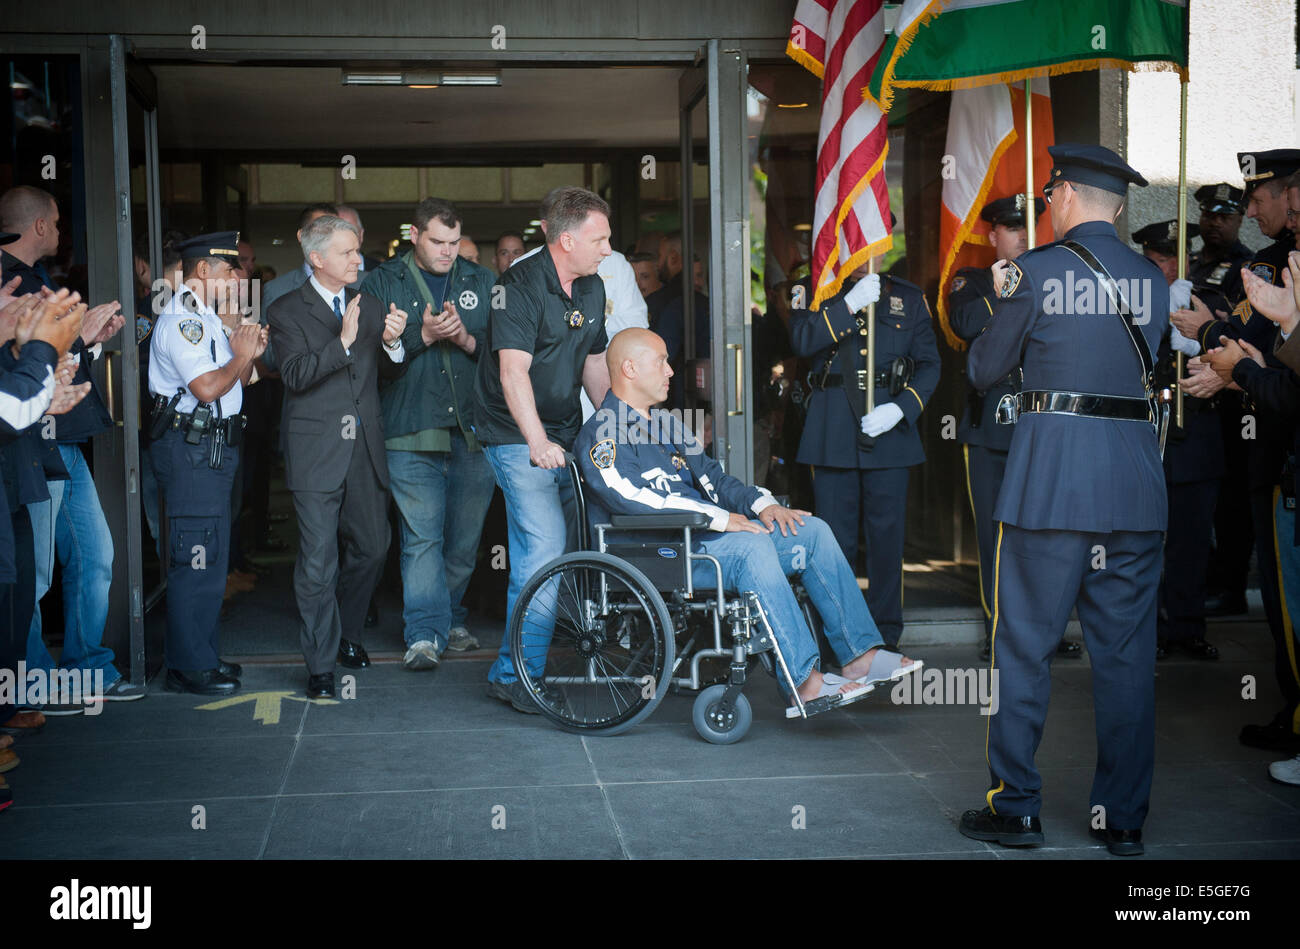 Manhattan, New York, USA. 30th July, 2014. NYPD Detective JOSEPH TROVATO pushes the wheels his partner, injured NYPD Detective MARIO MUNIZ of the Regional Task Force as he is discharged from Bellevue Hospital, Wednesday, July 30, 2014, injured US Marshal RYAN WESTFIELD (center) follows. © Bryan Smith/ZUMA Wire/Alamy Live News Stock Photo